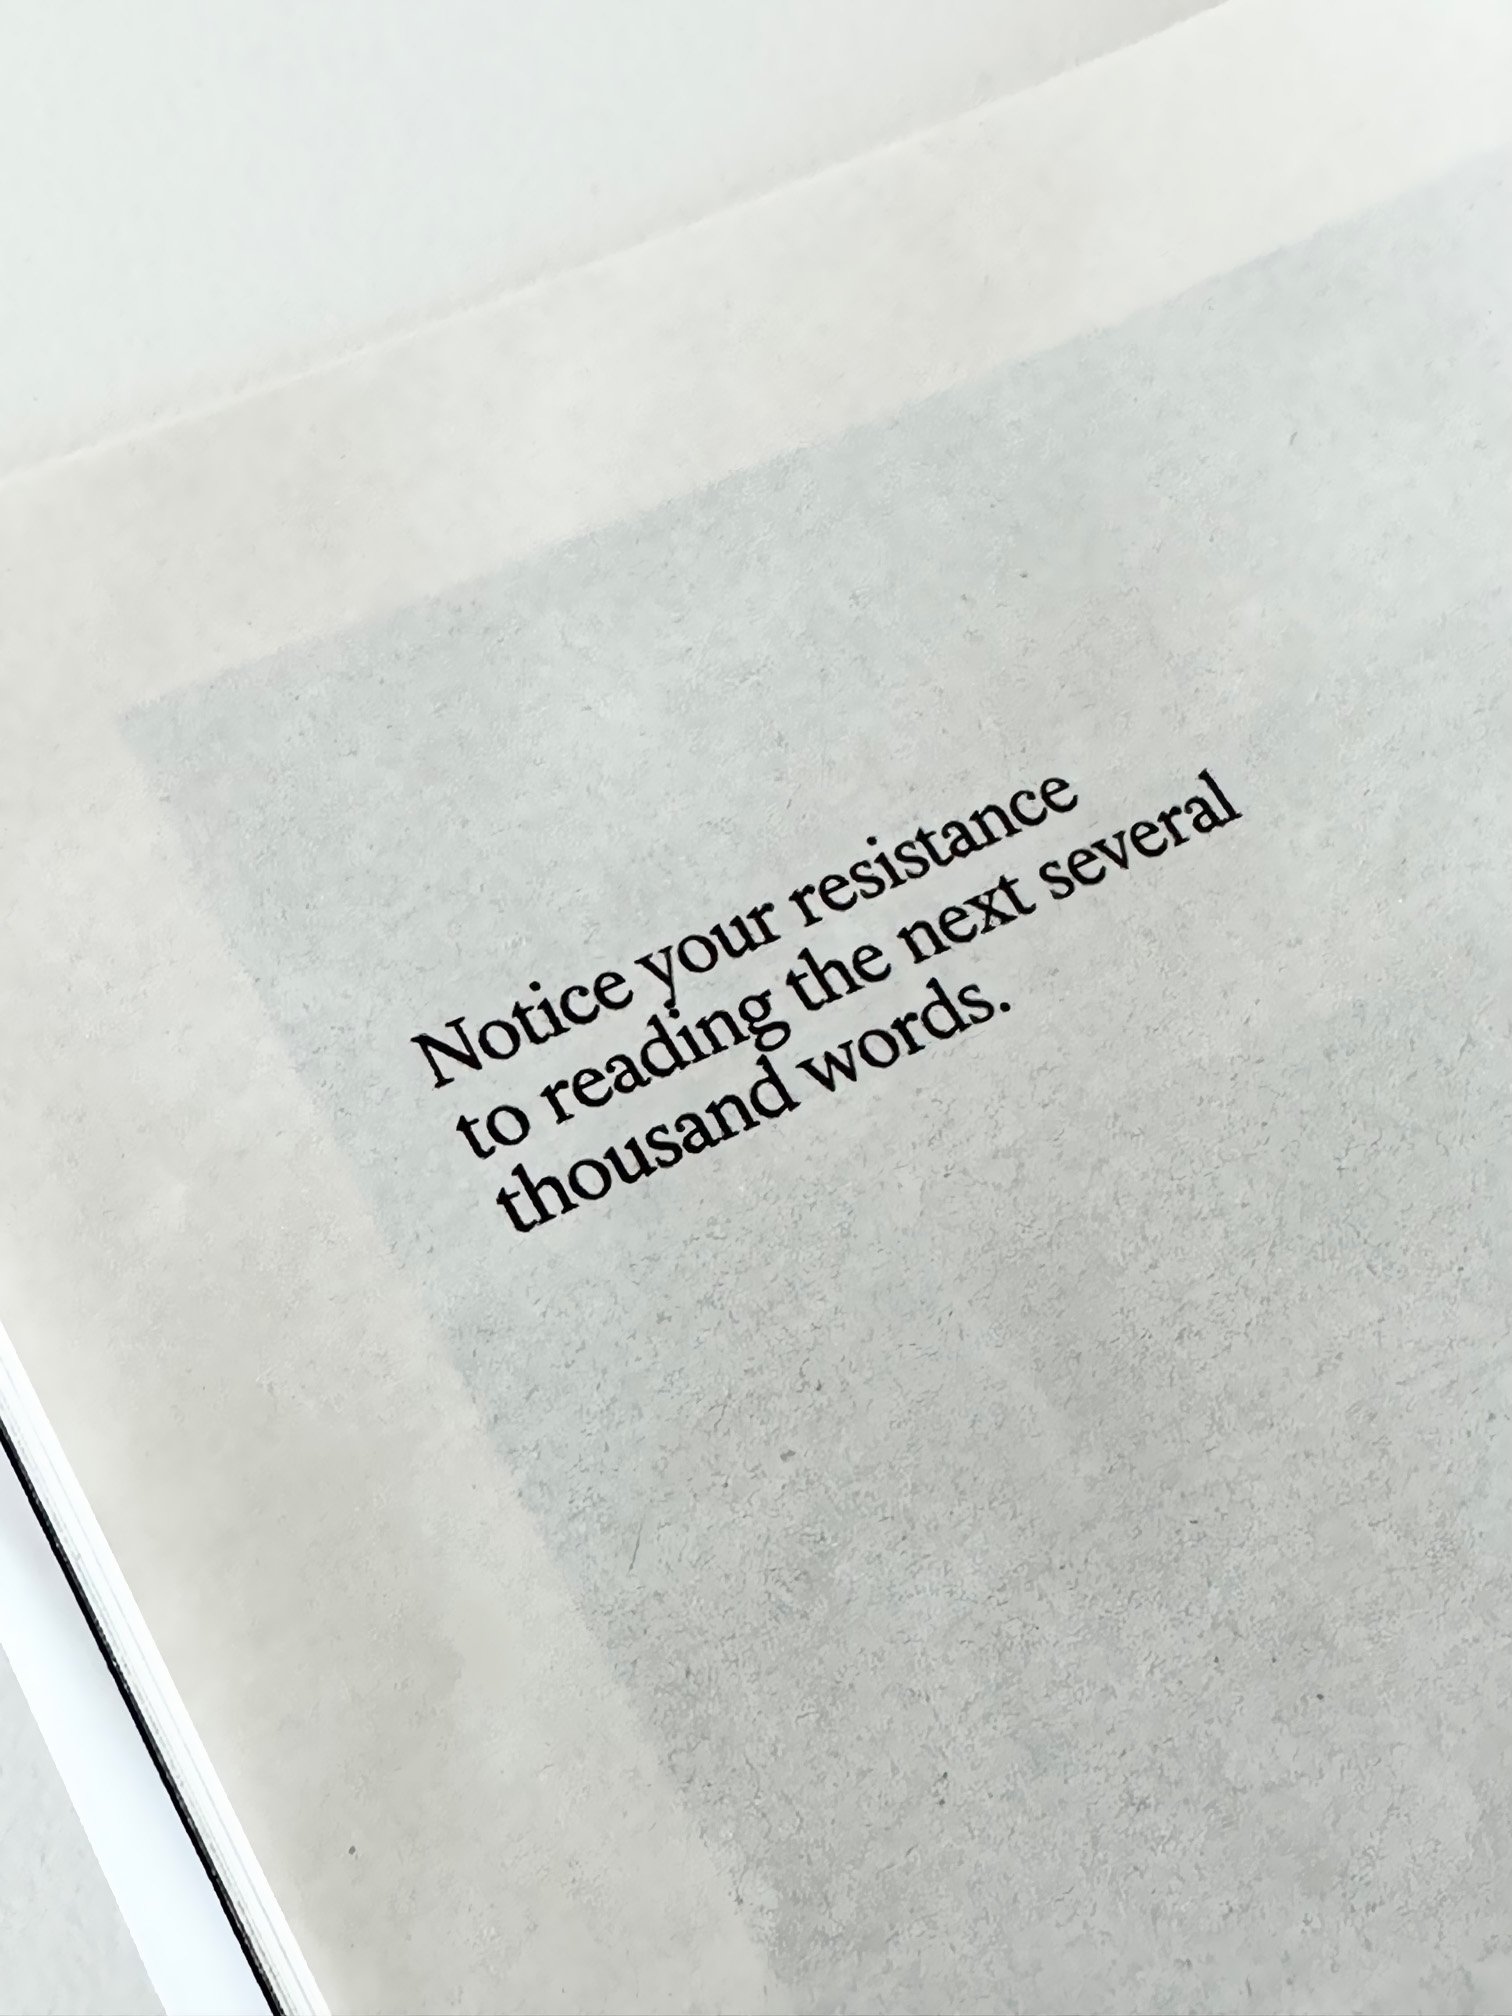  Text on paper: “Notice your resistance to reading the next several thousand words” 